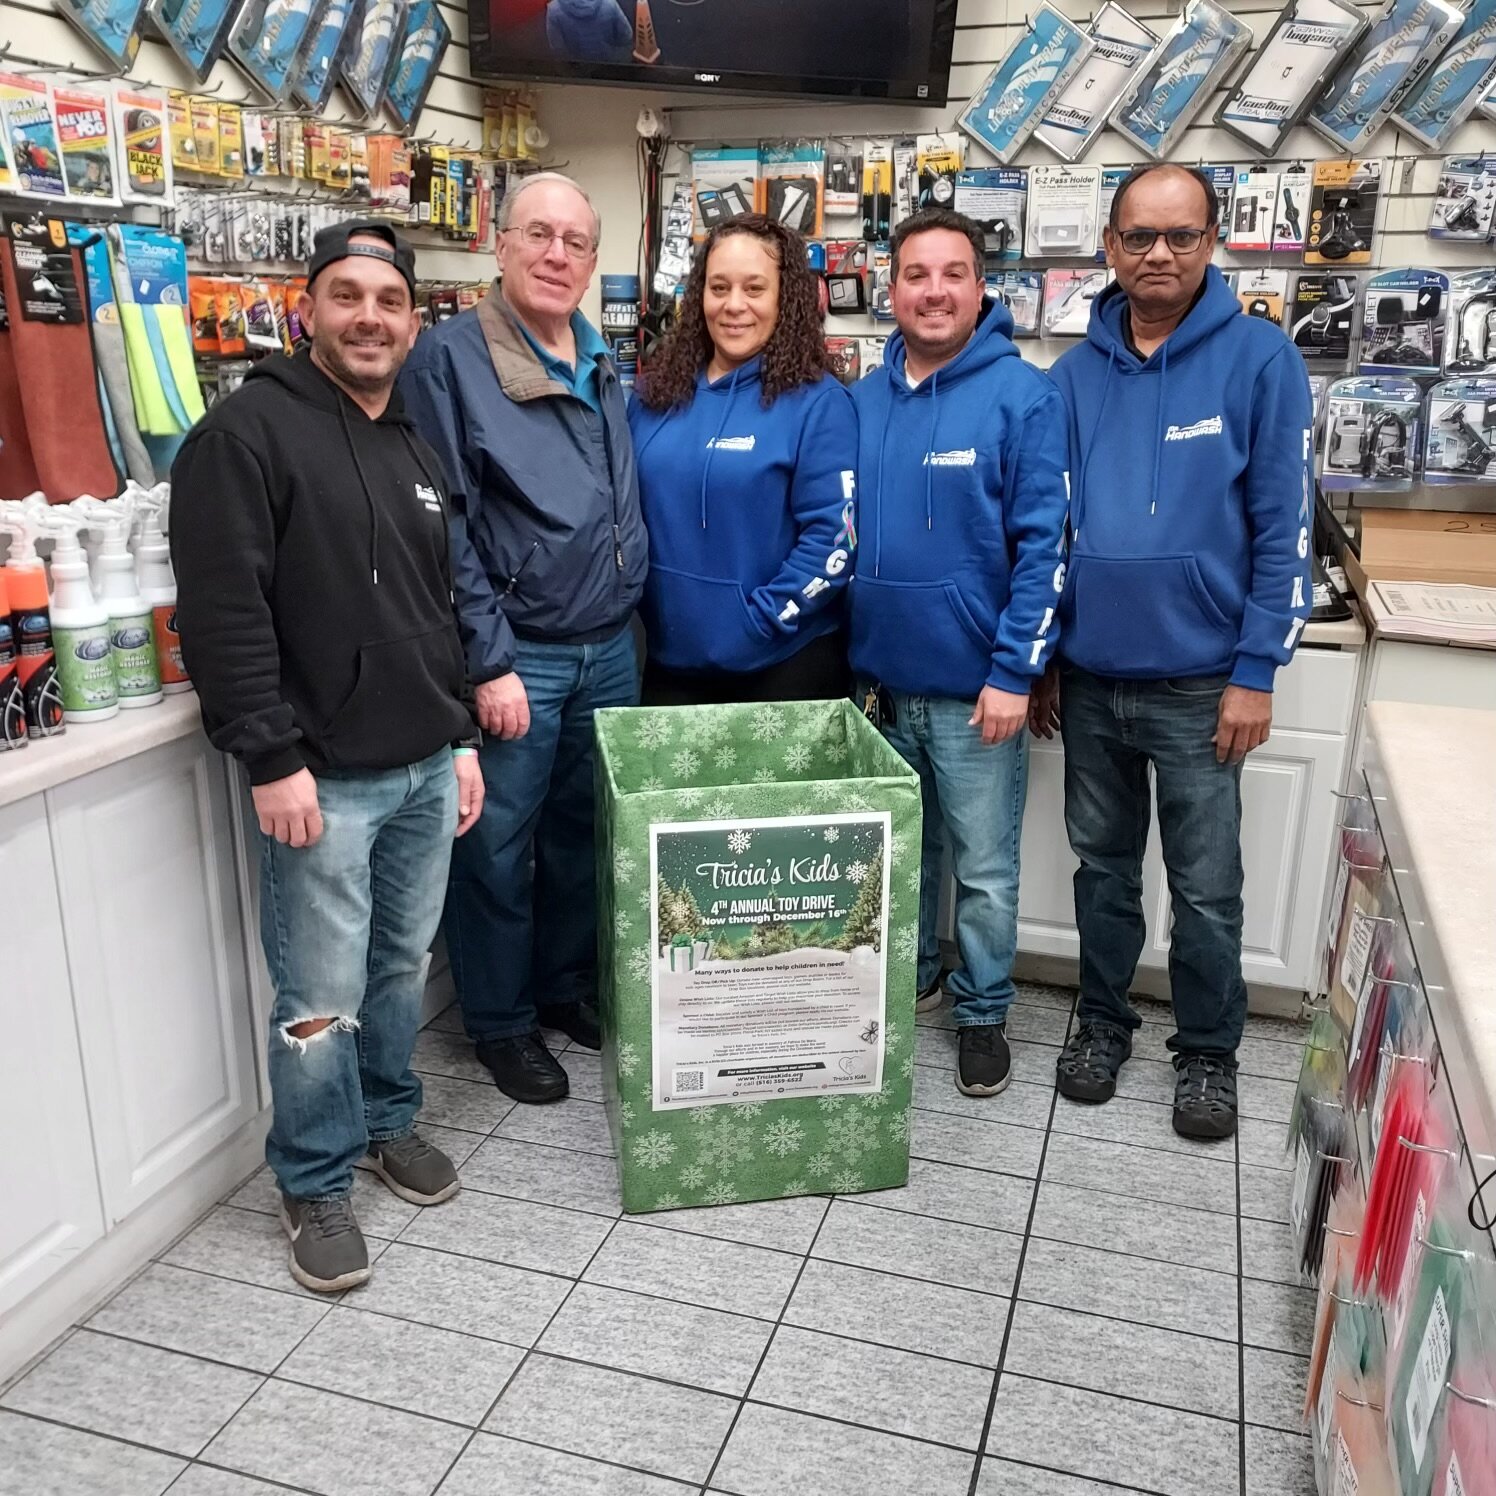 Frank Conte, Thomas DeMaria, Mimi Perullo, Chris Conte and Patel Bipinchandra at Mr. Handwash encourage community members to donate toys for nonprofit Tricia’s Kids this holiday season.